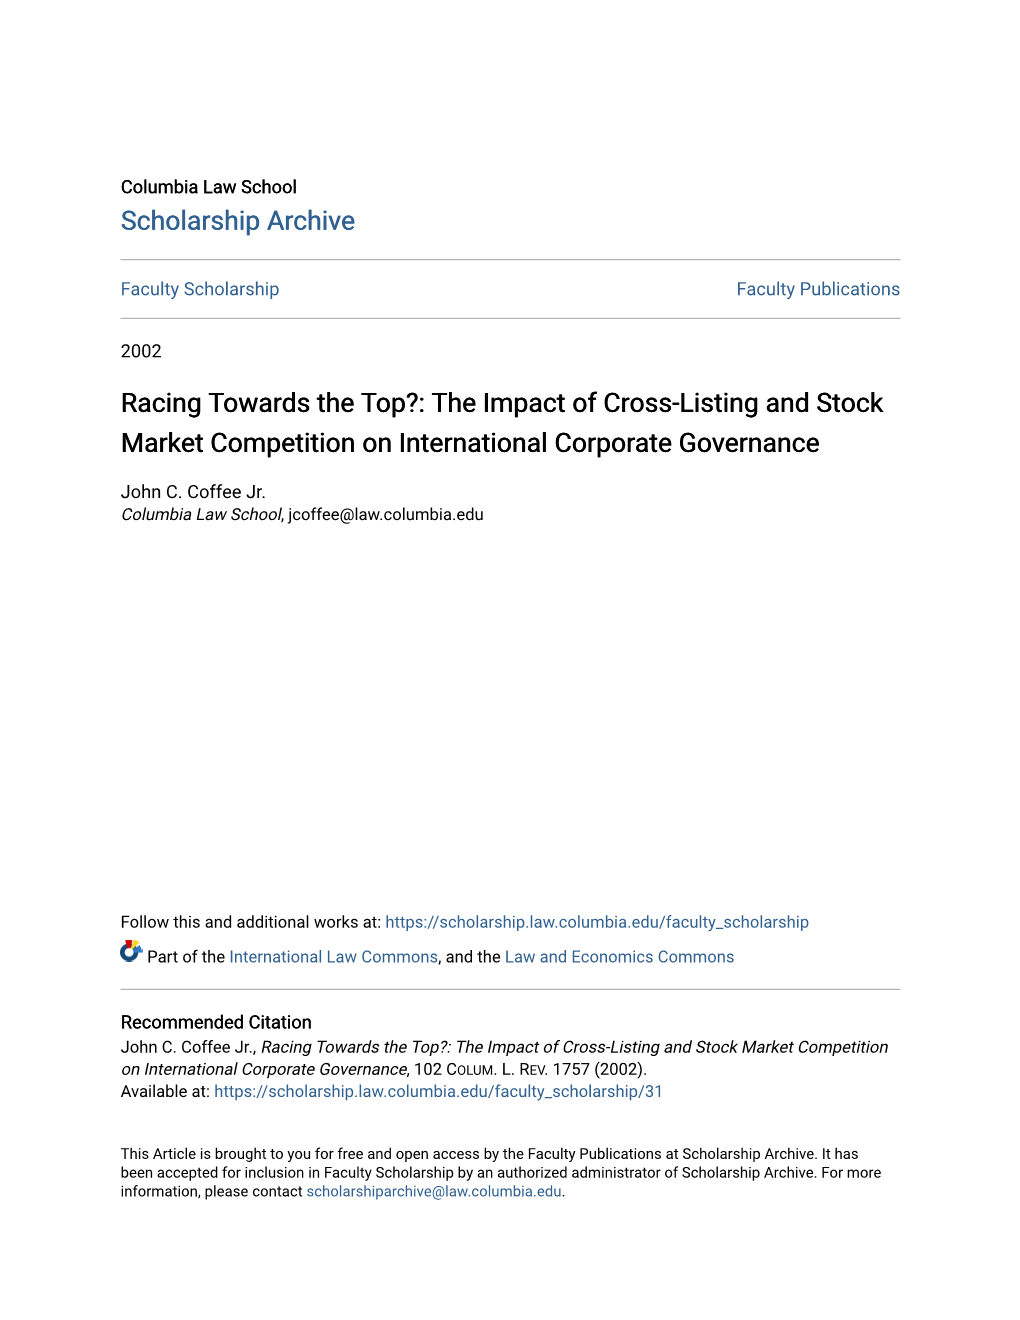 The Impact of Cross-Listing and Stock Market Competition on International Corporate Governance